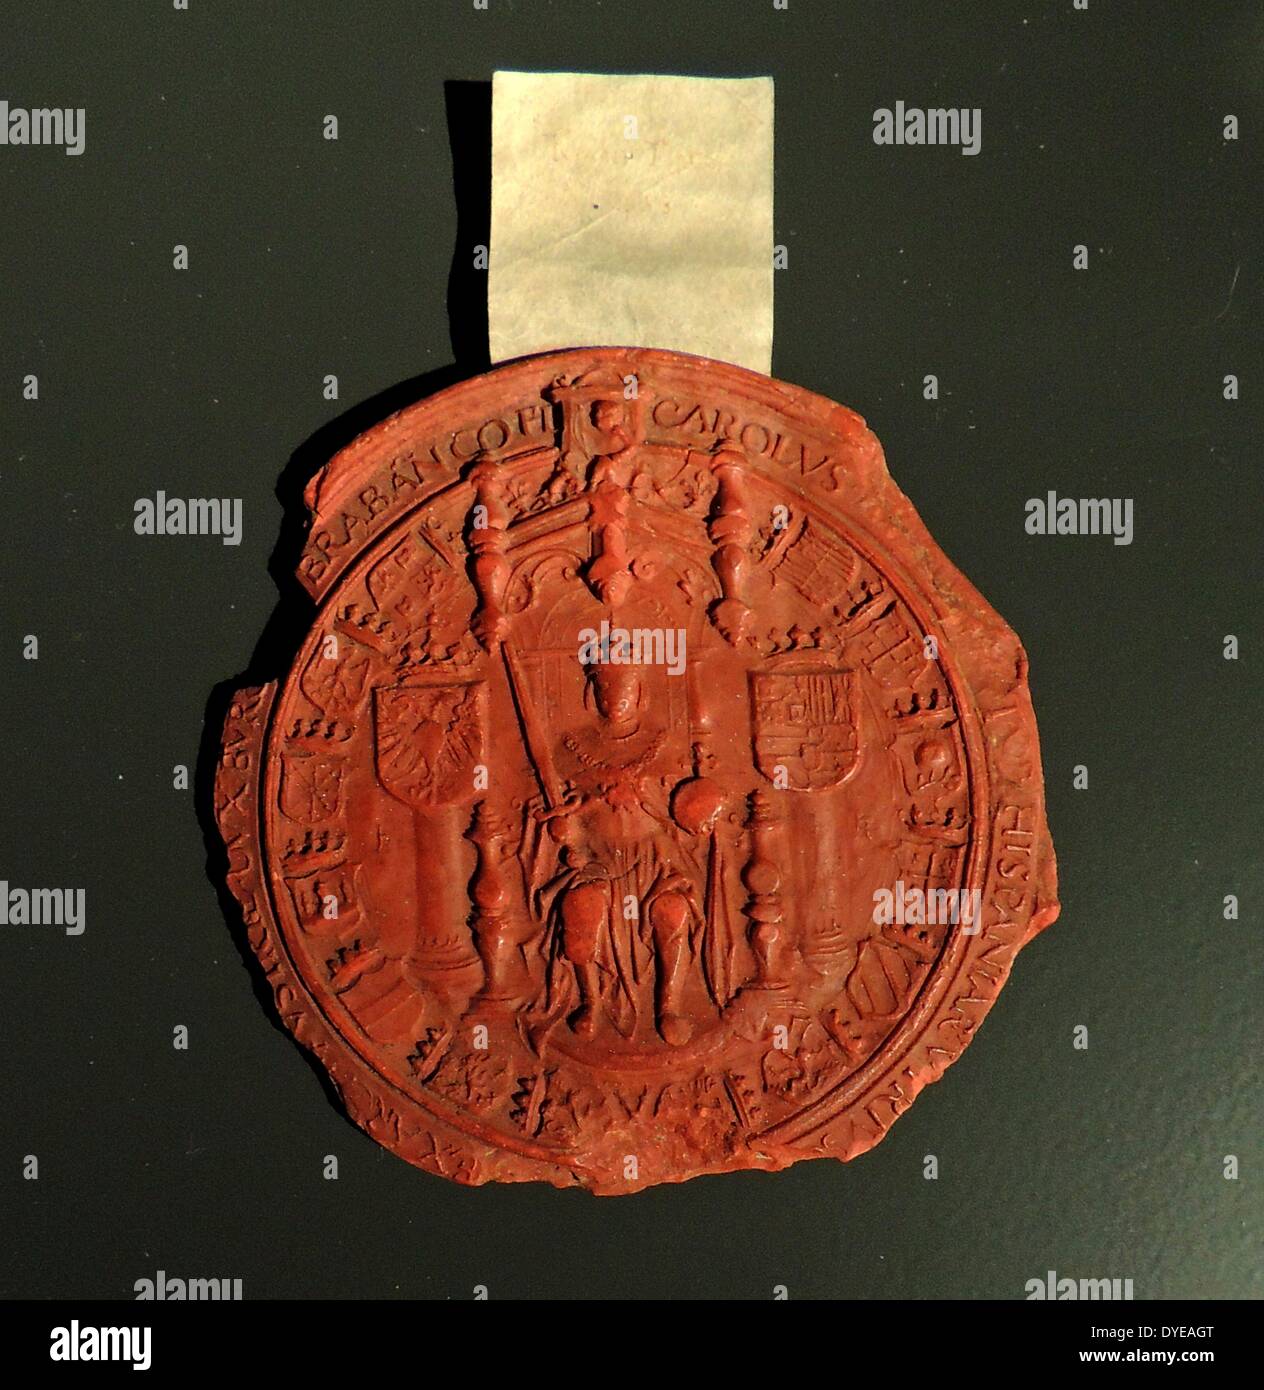 Wax seal of the Emperor Charles V. Dutch 16th Century Stock Photo